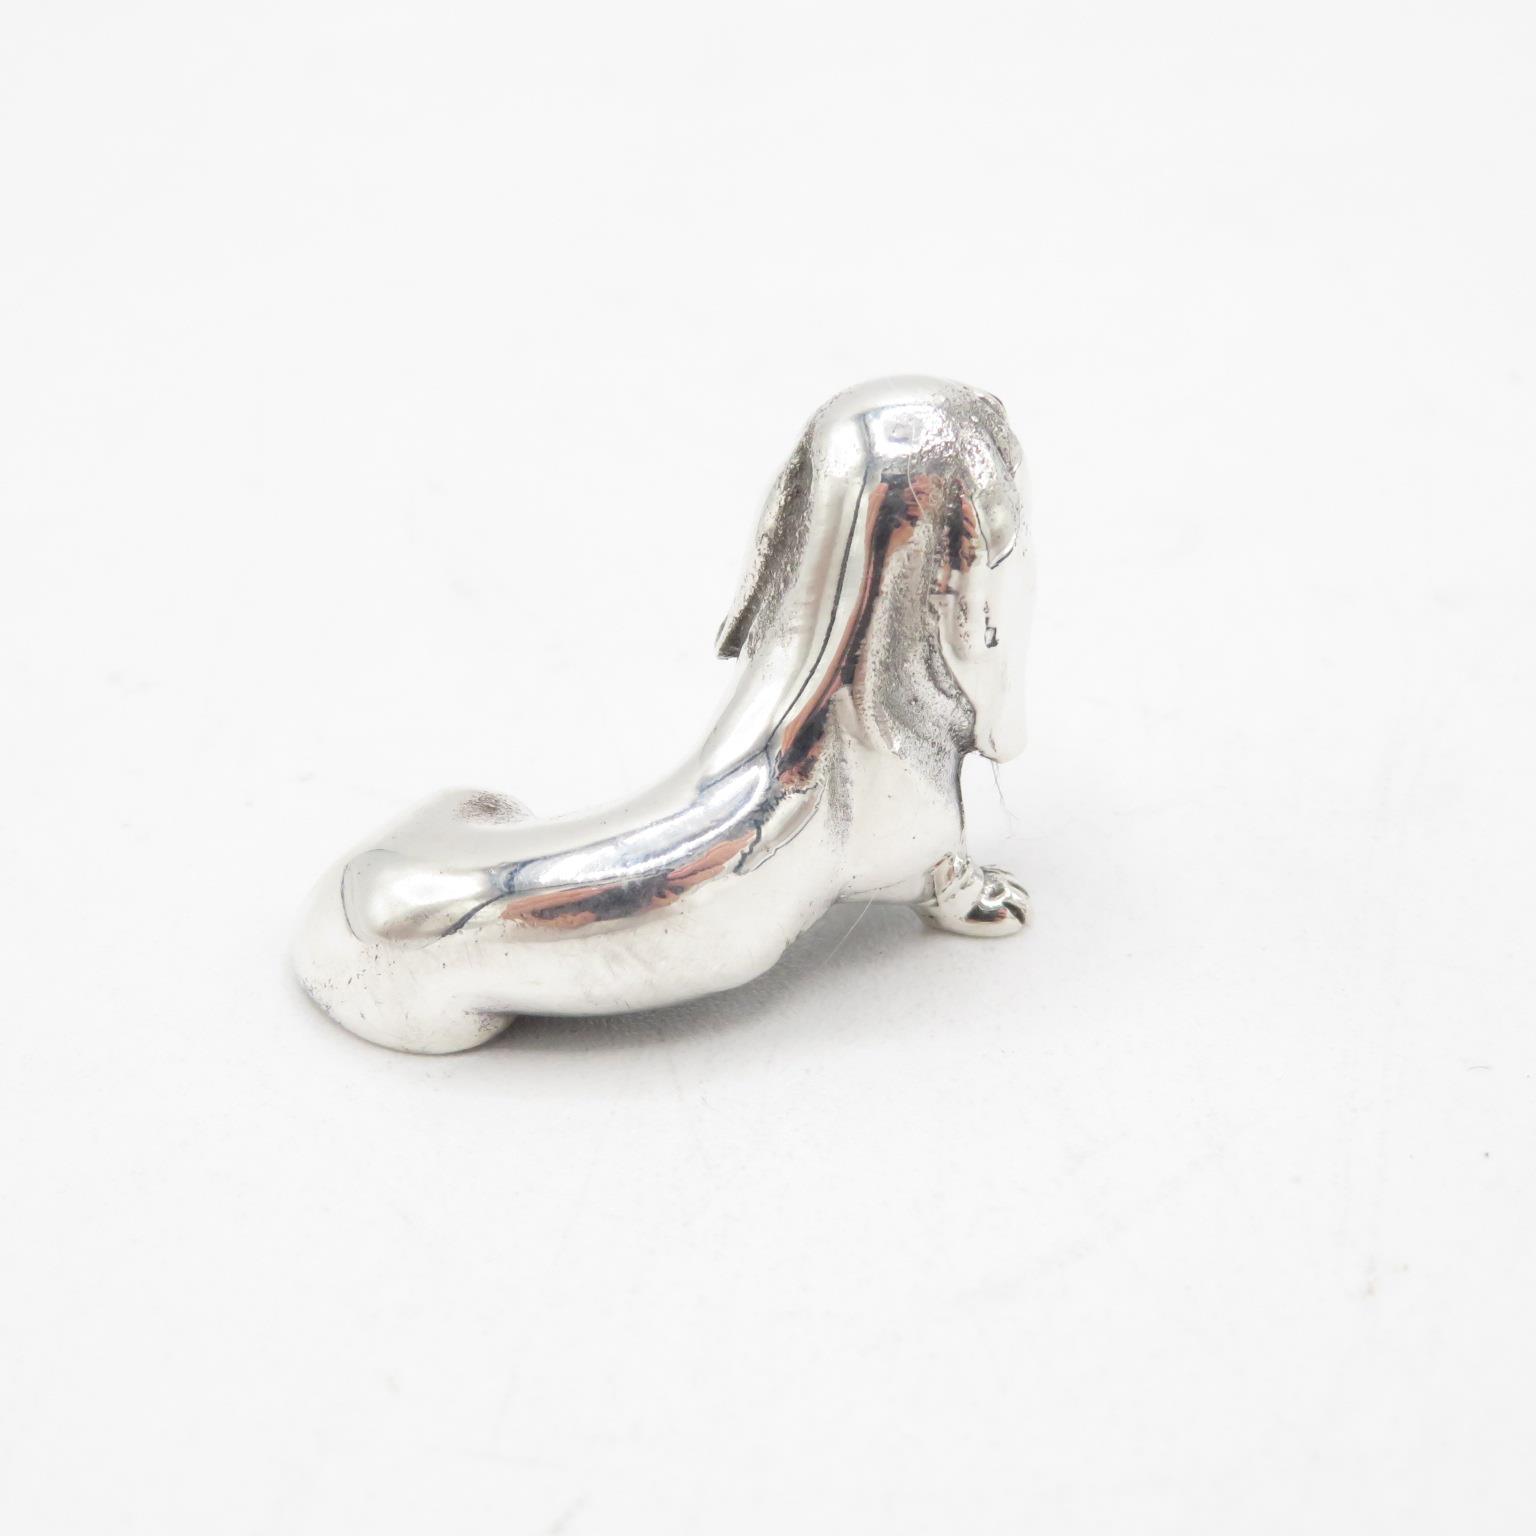 HM 925 Sterling Silver Dachshund Sausage Dog in excellent condition (15g) 40mm long - Image 4 of 5